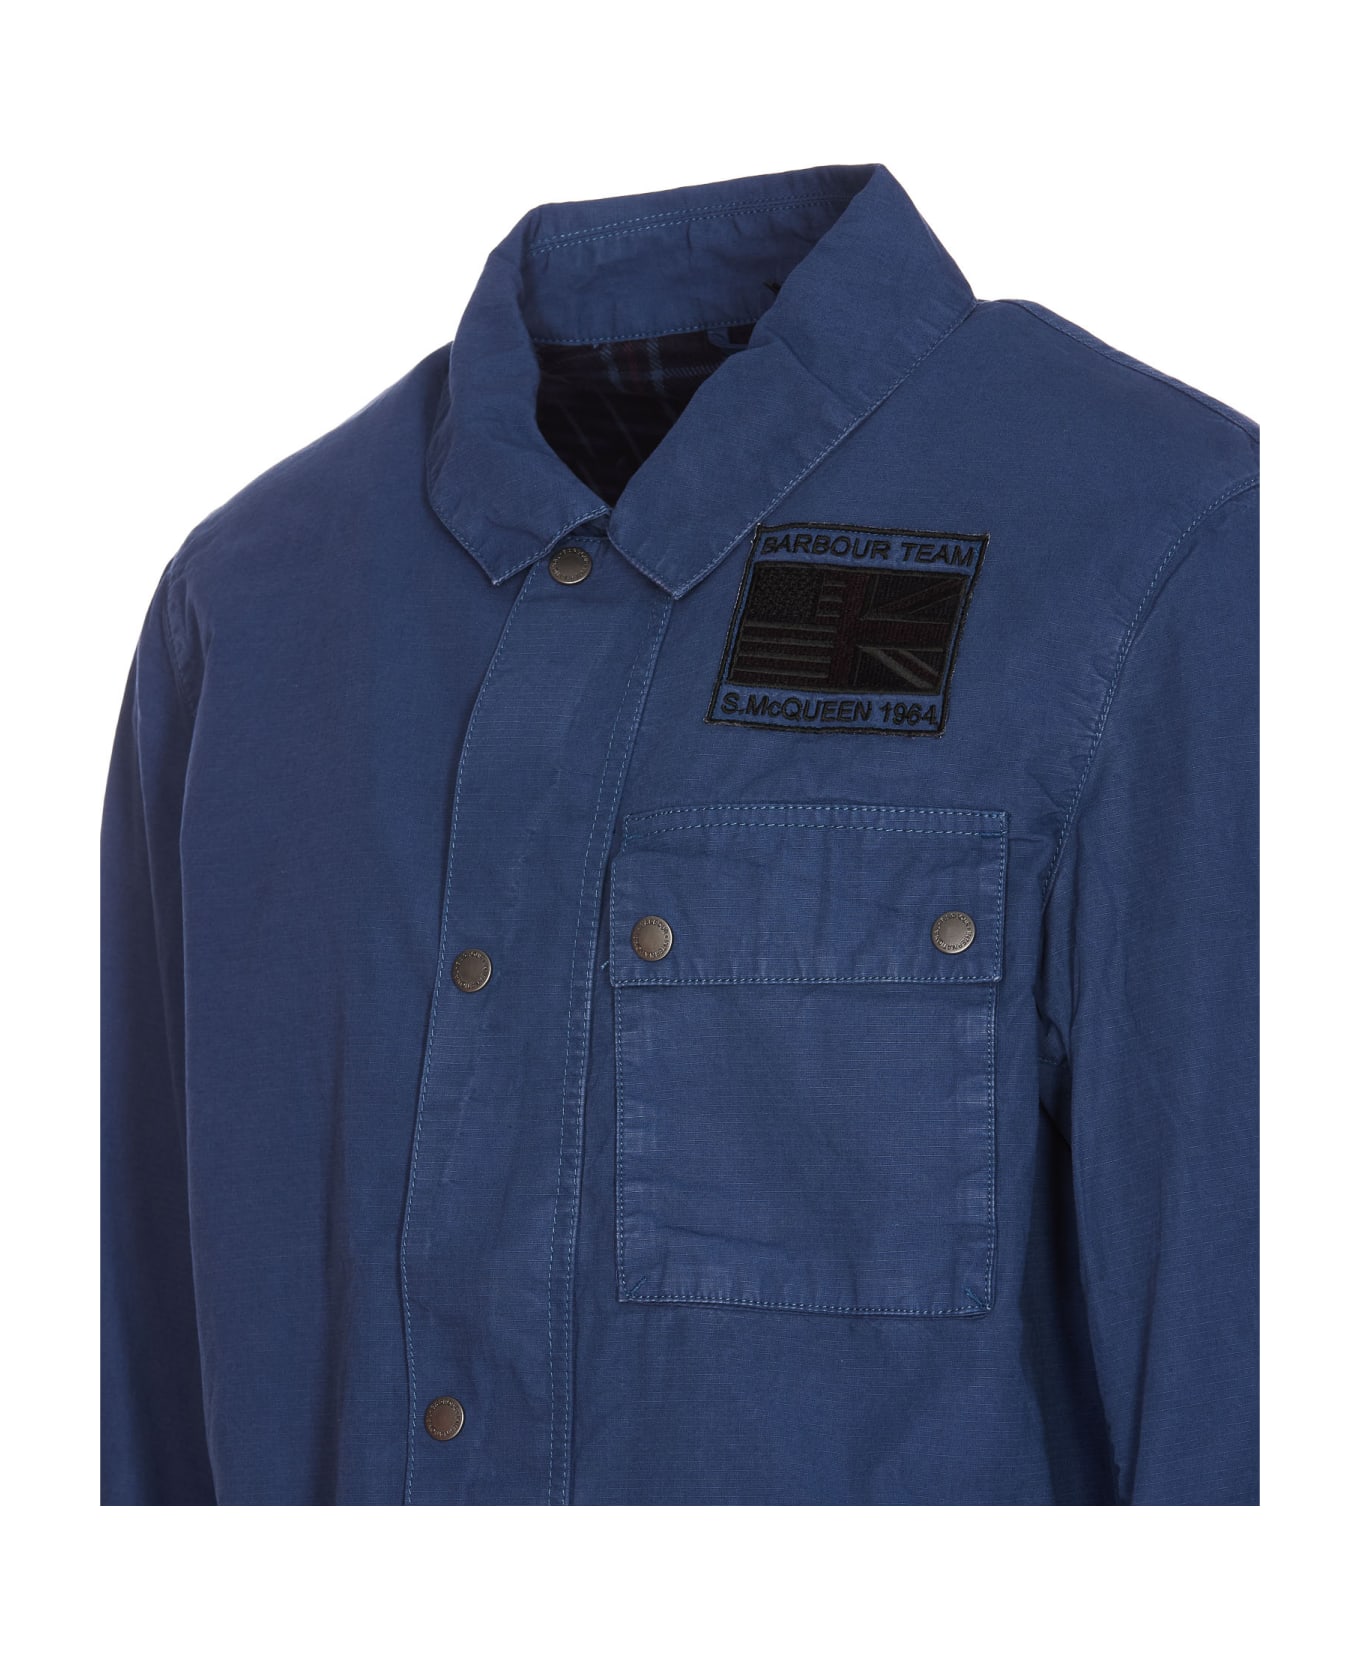 Barbour Casual Blue Jacket - Blue ブレザー